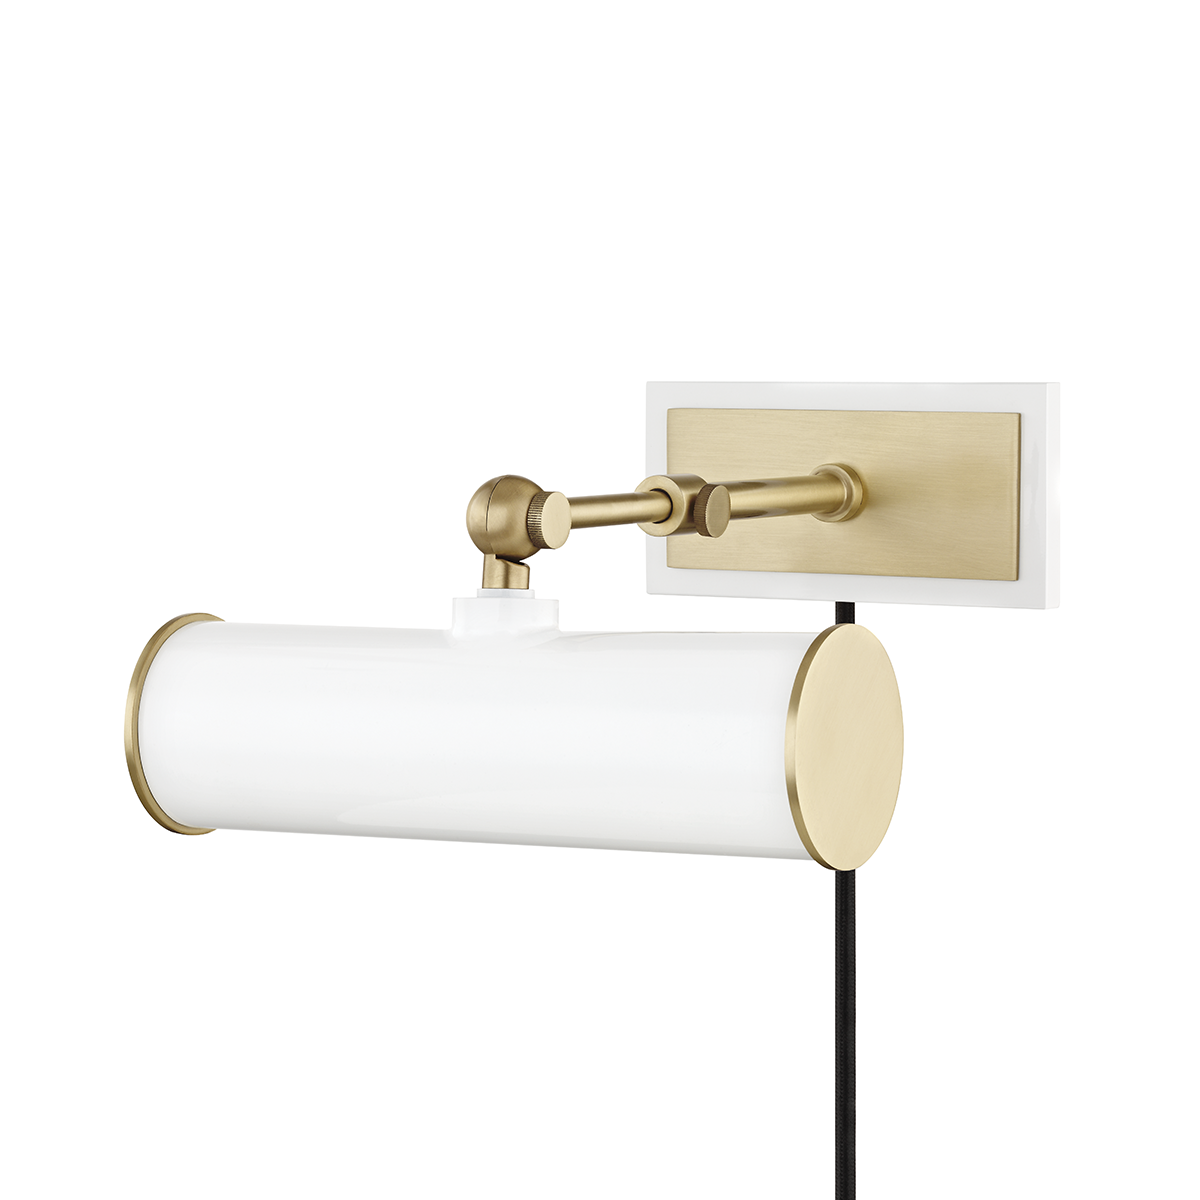 Hudson Valley Lighting Holly 1 Light Picture Light With Plug HL263201 Wall Light Fixtures Mitzi by Hudson Valley Lighting Aged Brass/Soft Off White  